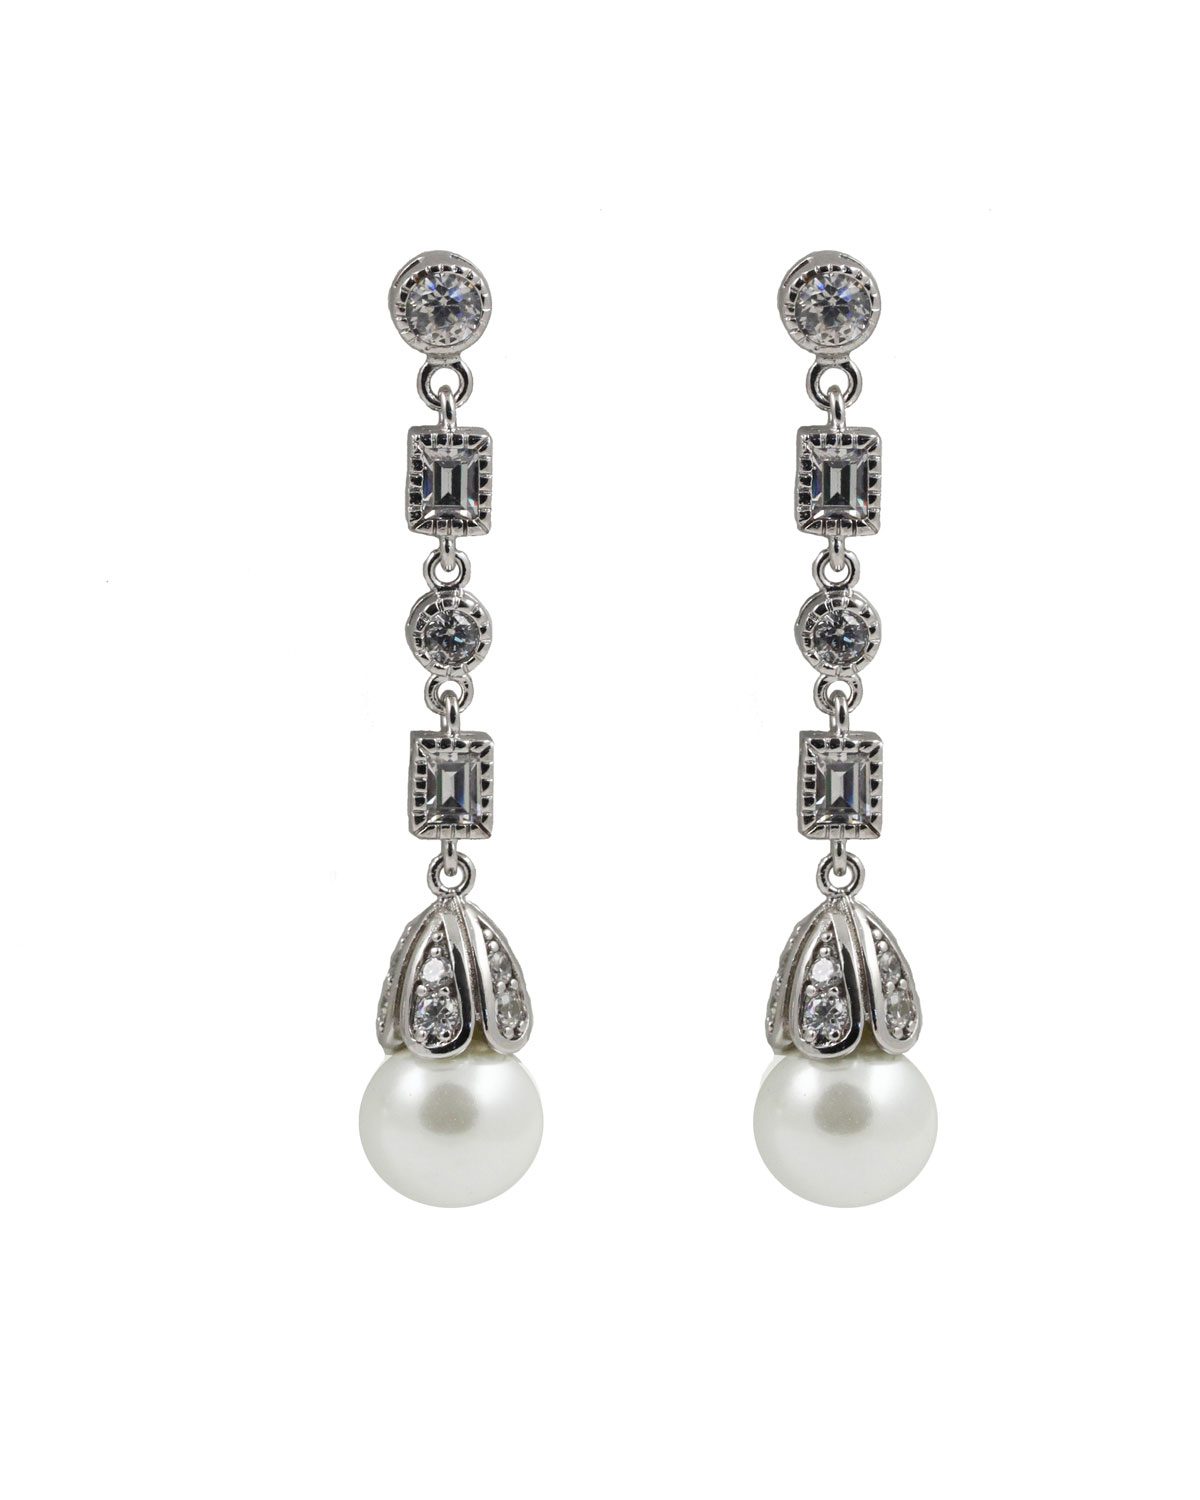 Prive Bridal antique pearl earring